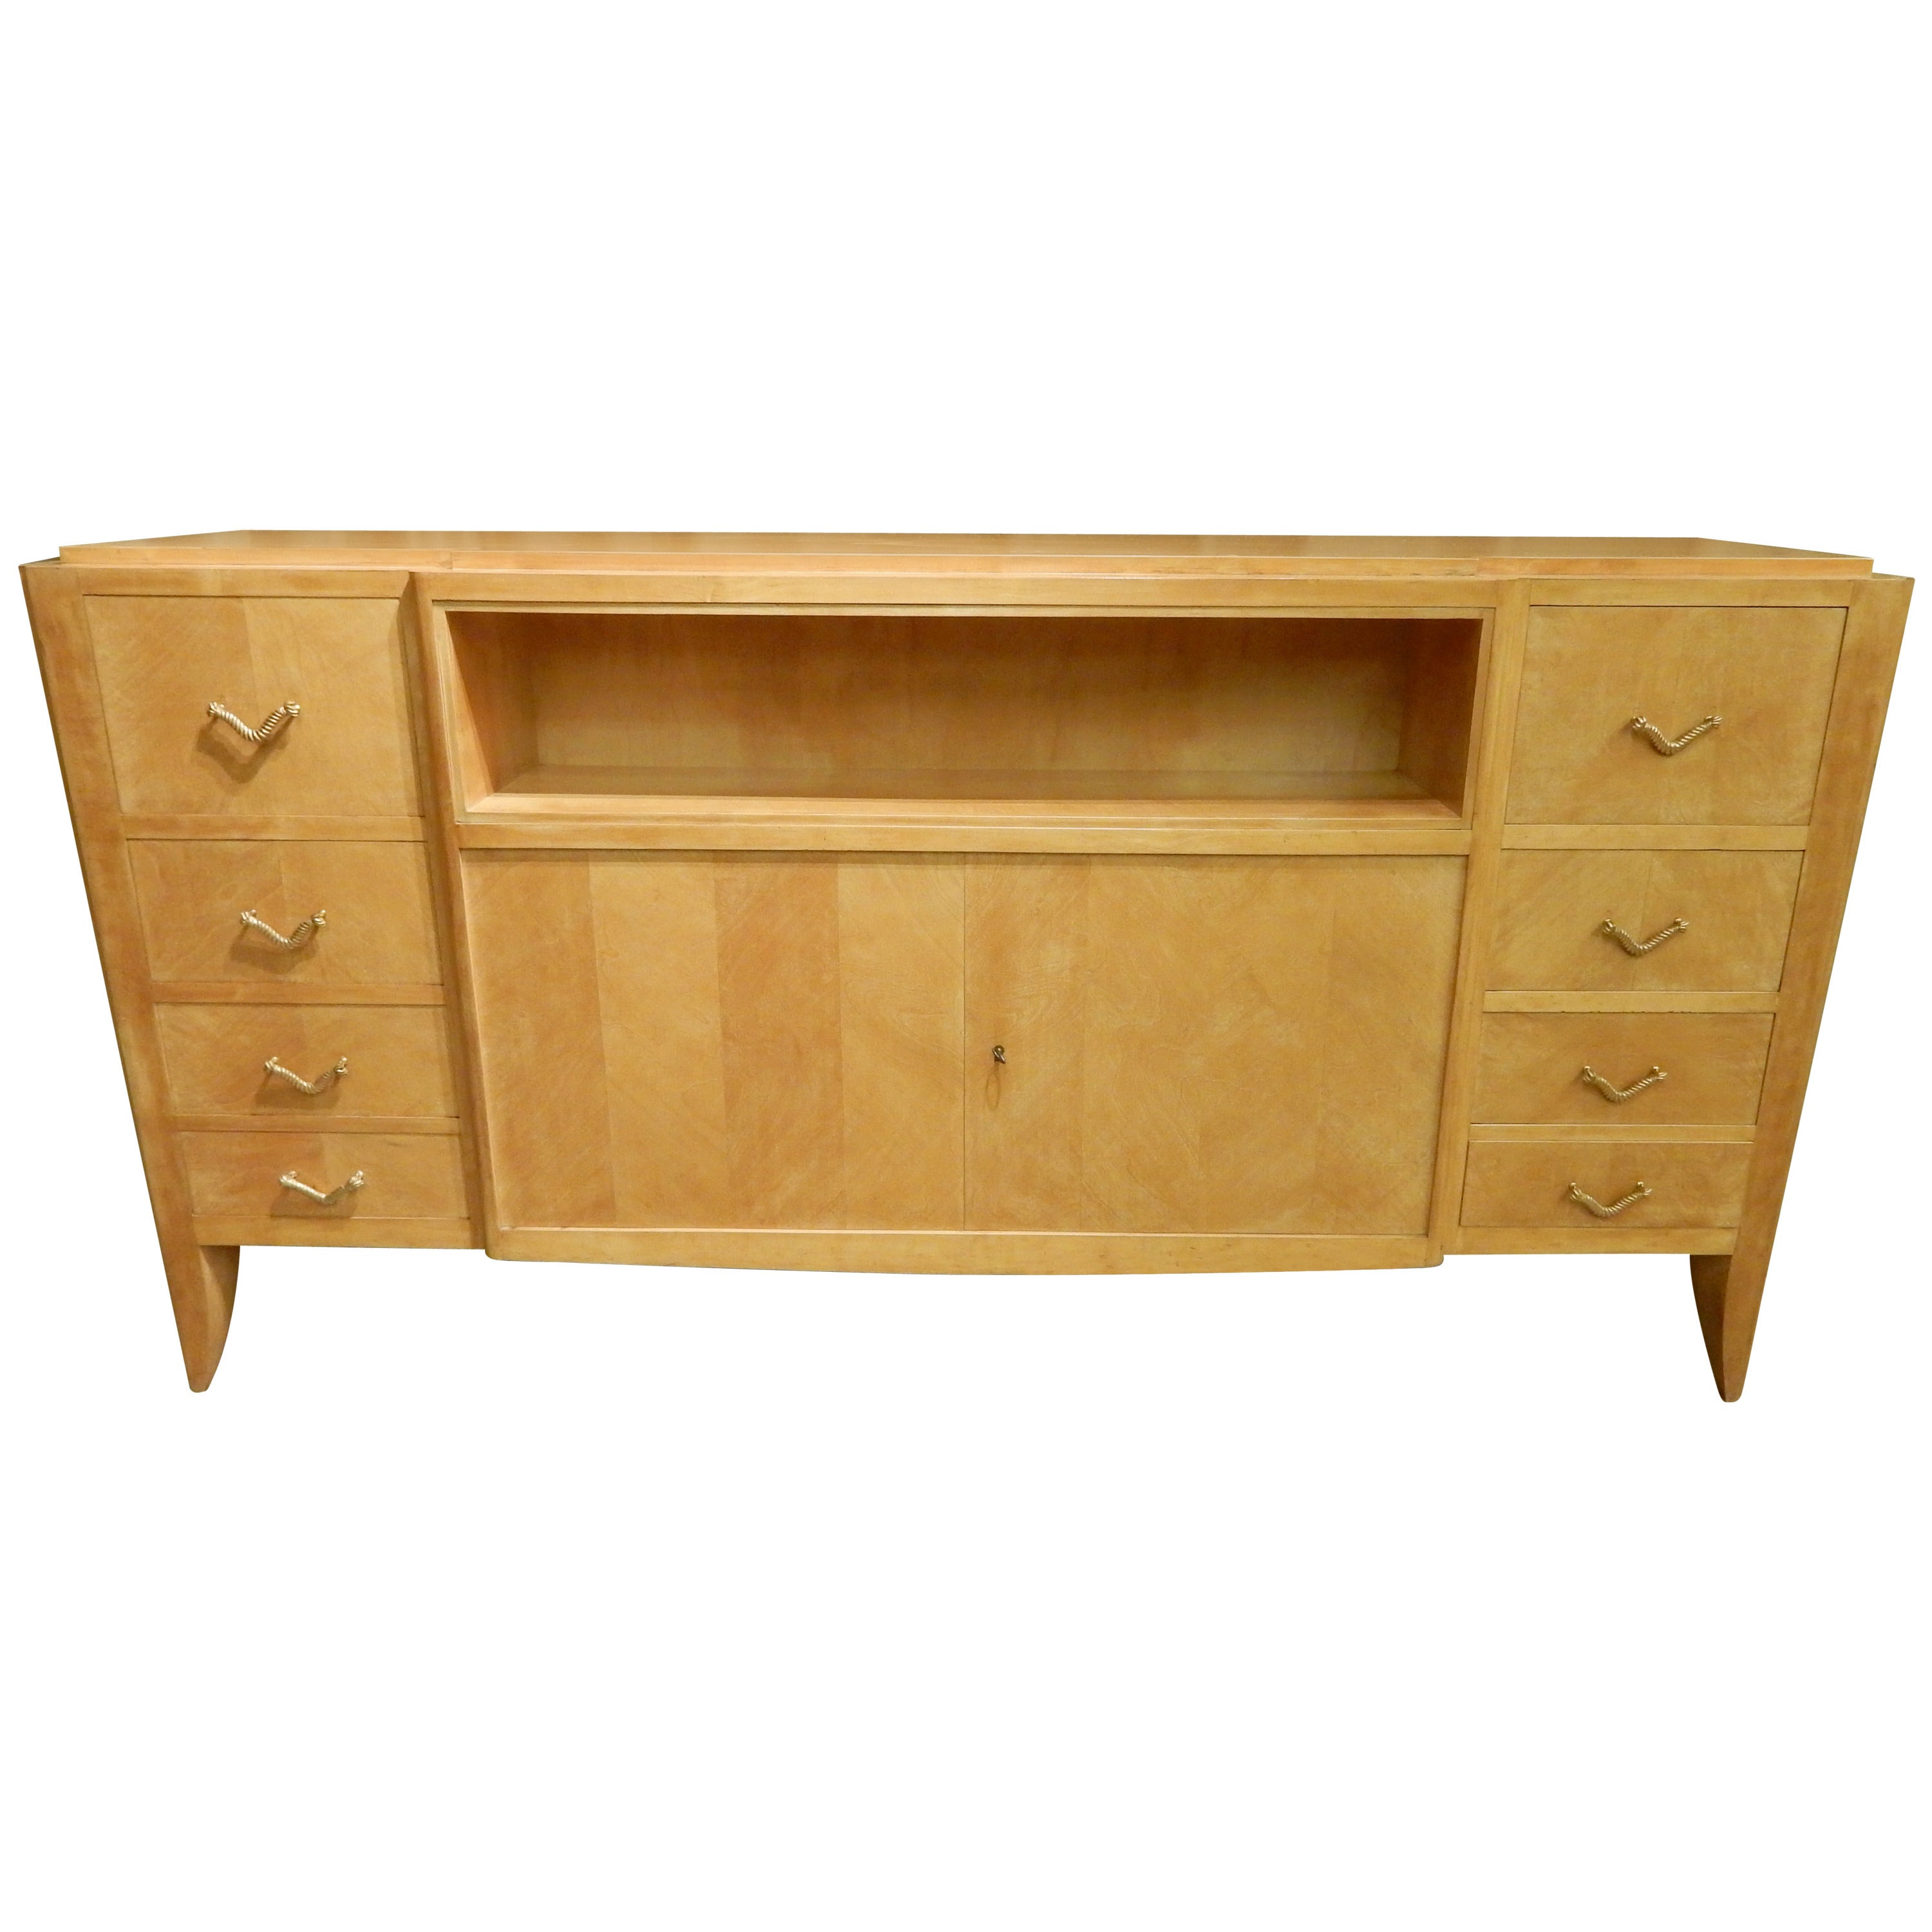 French Mid-Century Modern Sideboard For Sale